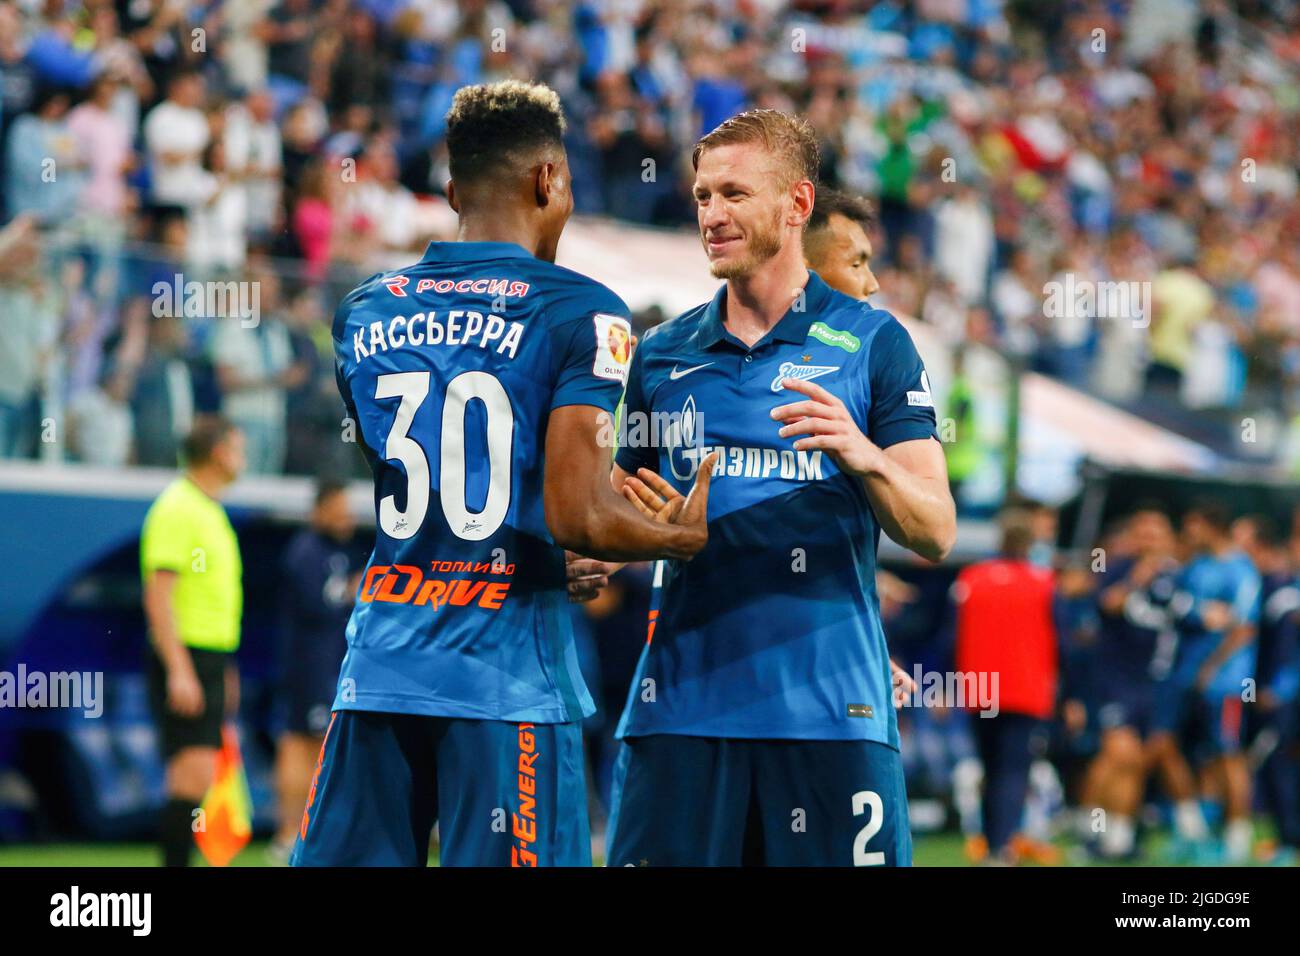 Saint Petersburg, Russia. 09th July, 2022. Zander Mateo Cassierra Cabezas, commonly known as Mateo Cassierra (No.30) and Dmitri Chistyakov (No.2) of Zenit seen during the Olimpbet Russian Football Super Cup football match between Zenit Saint Petersburg and Spartak Moscow at Gazprom Arena. Final score; Zenit 4:0 Spartak. Credit: SOPA Images Limited/Alamy Live News Stock Photo